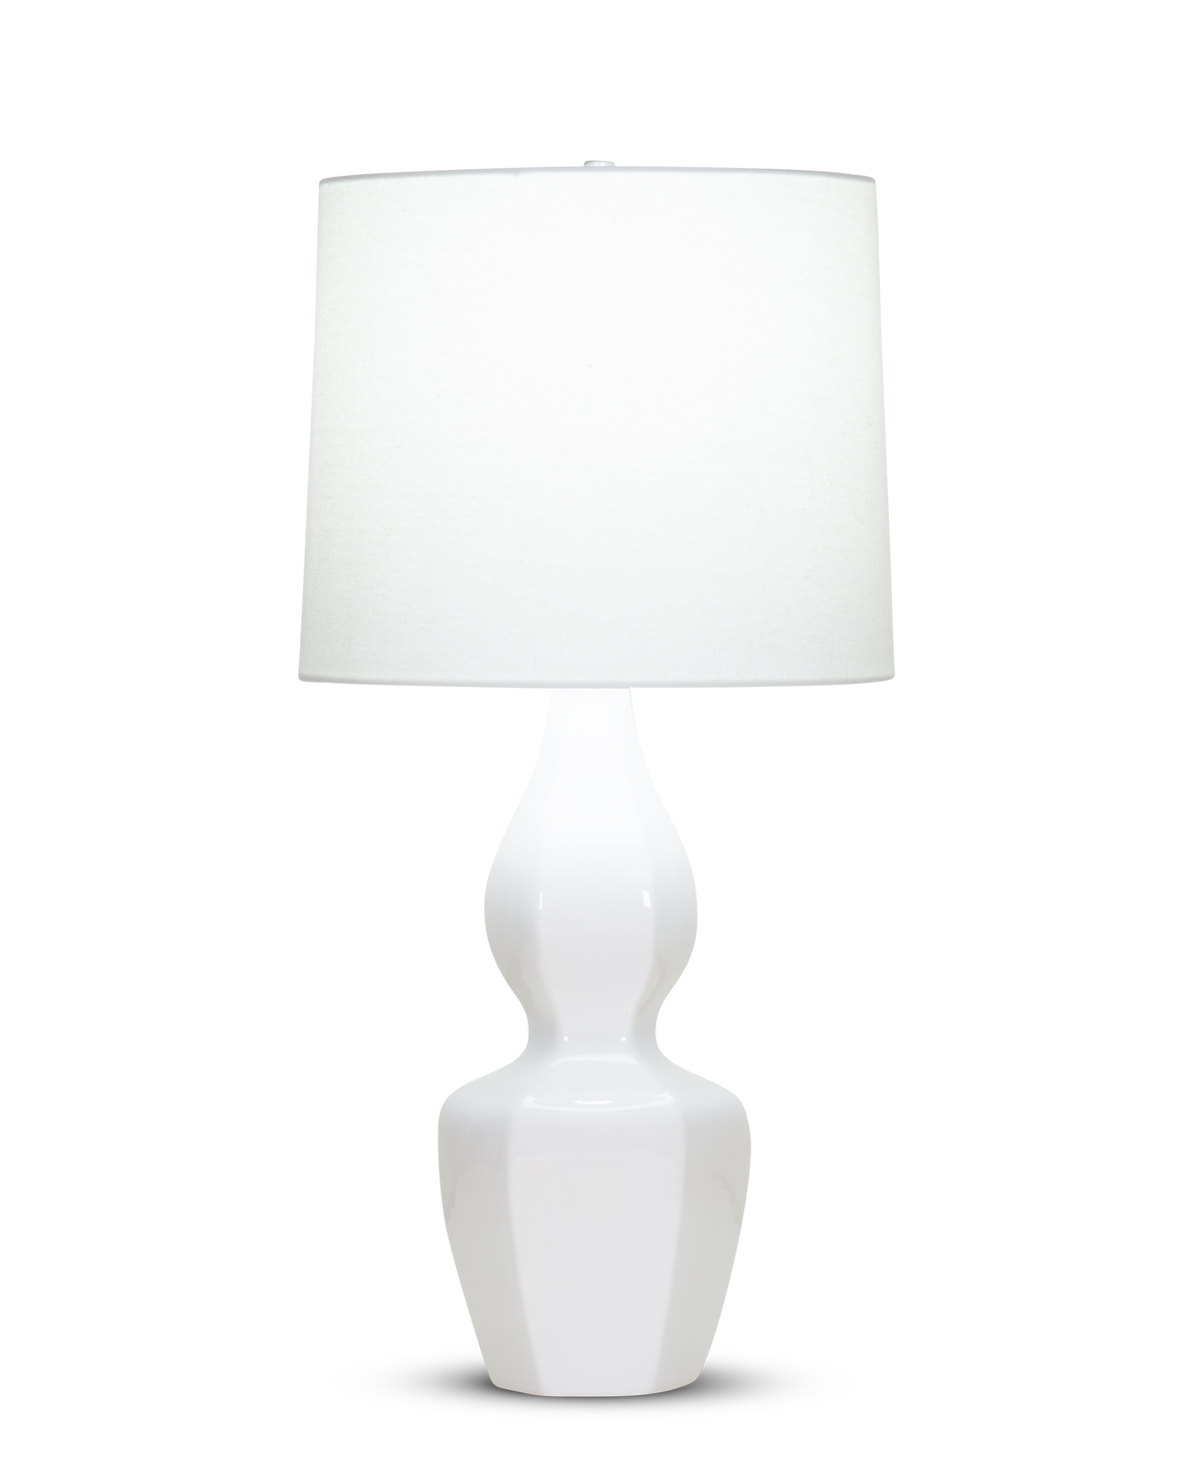 FlowDecor Claire Table Lamp in ceramic with off-white finish and off-white linen tapered drum shade (# 4352)